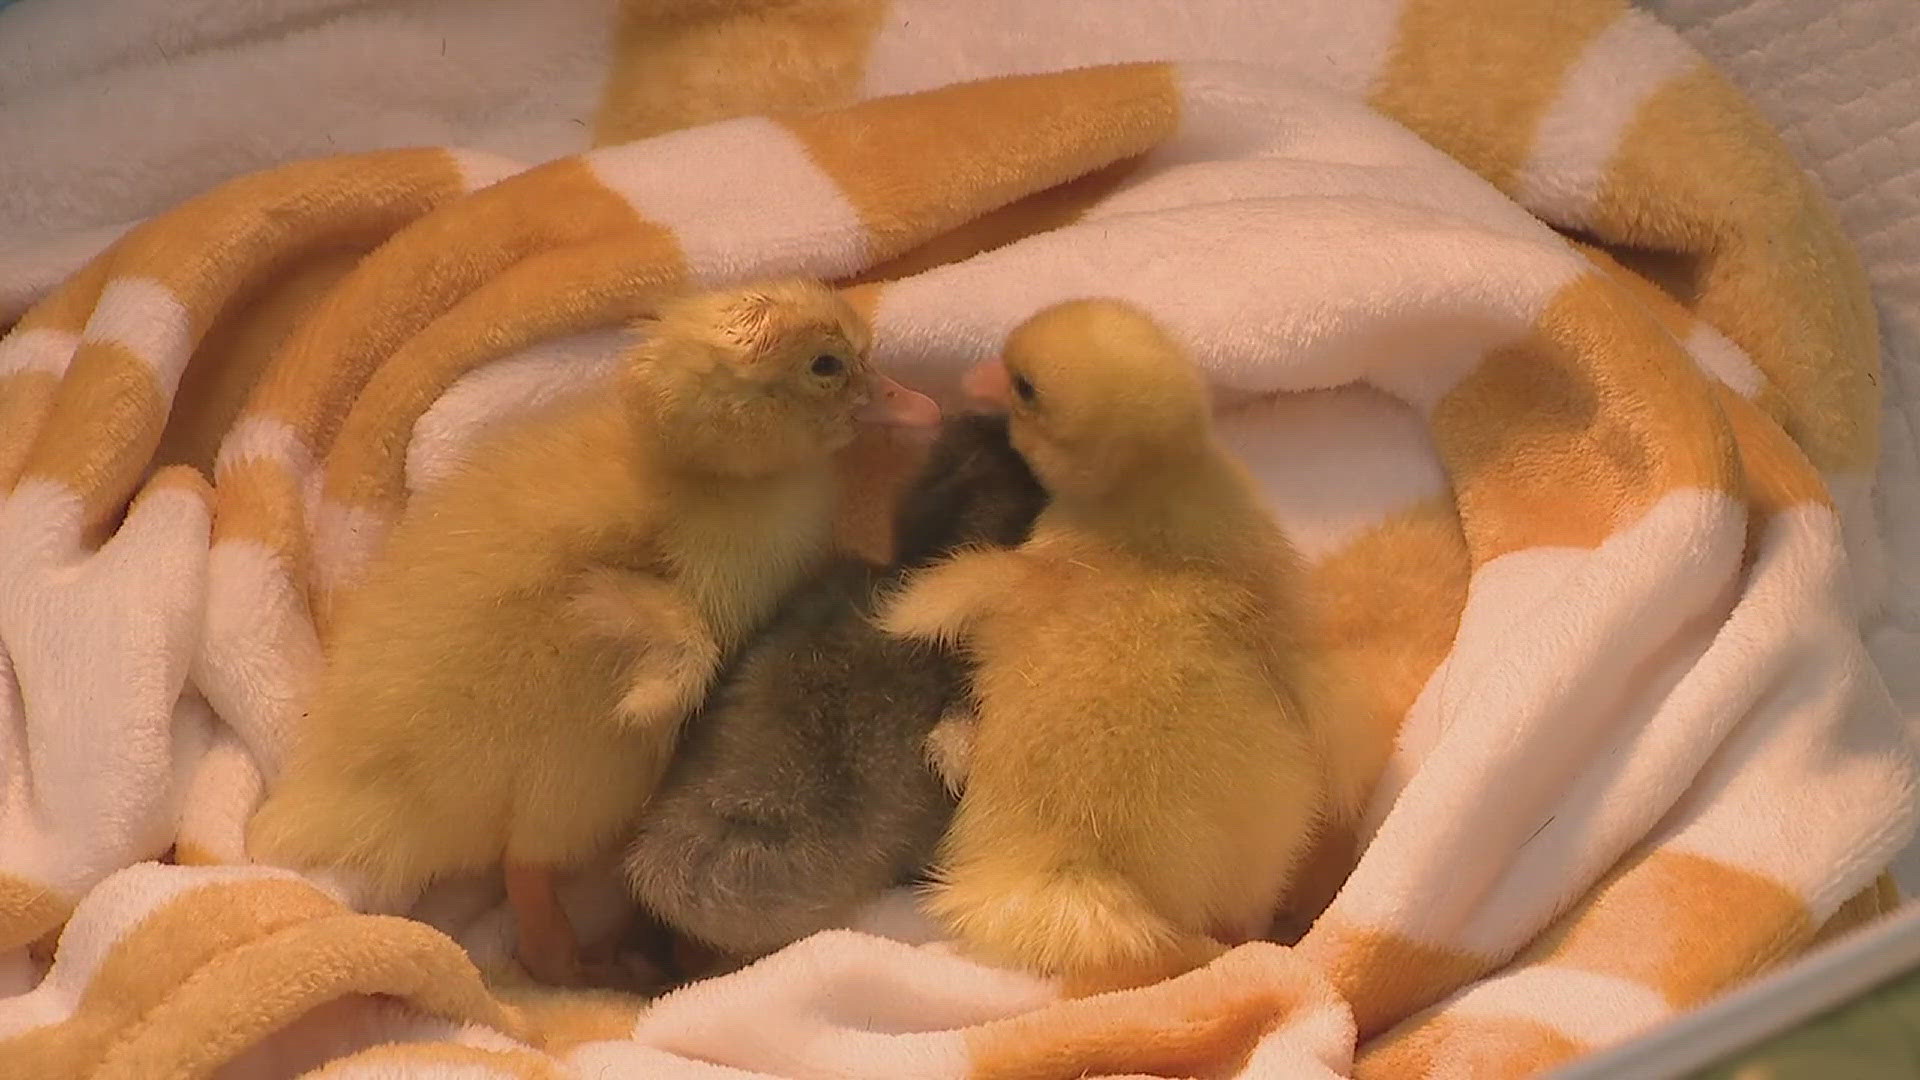 Students at Jefferson Elementary School in Davenport spent the last month learning about the stages of a duck's growth in its shell before hatching.